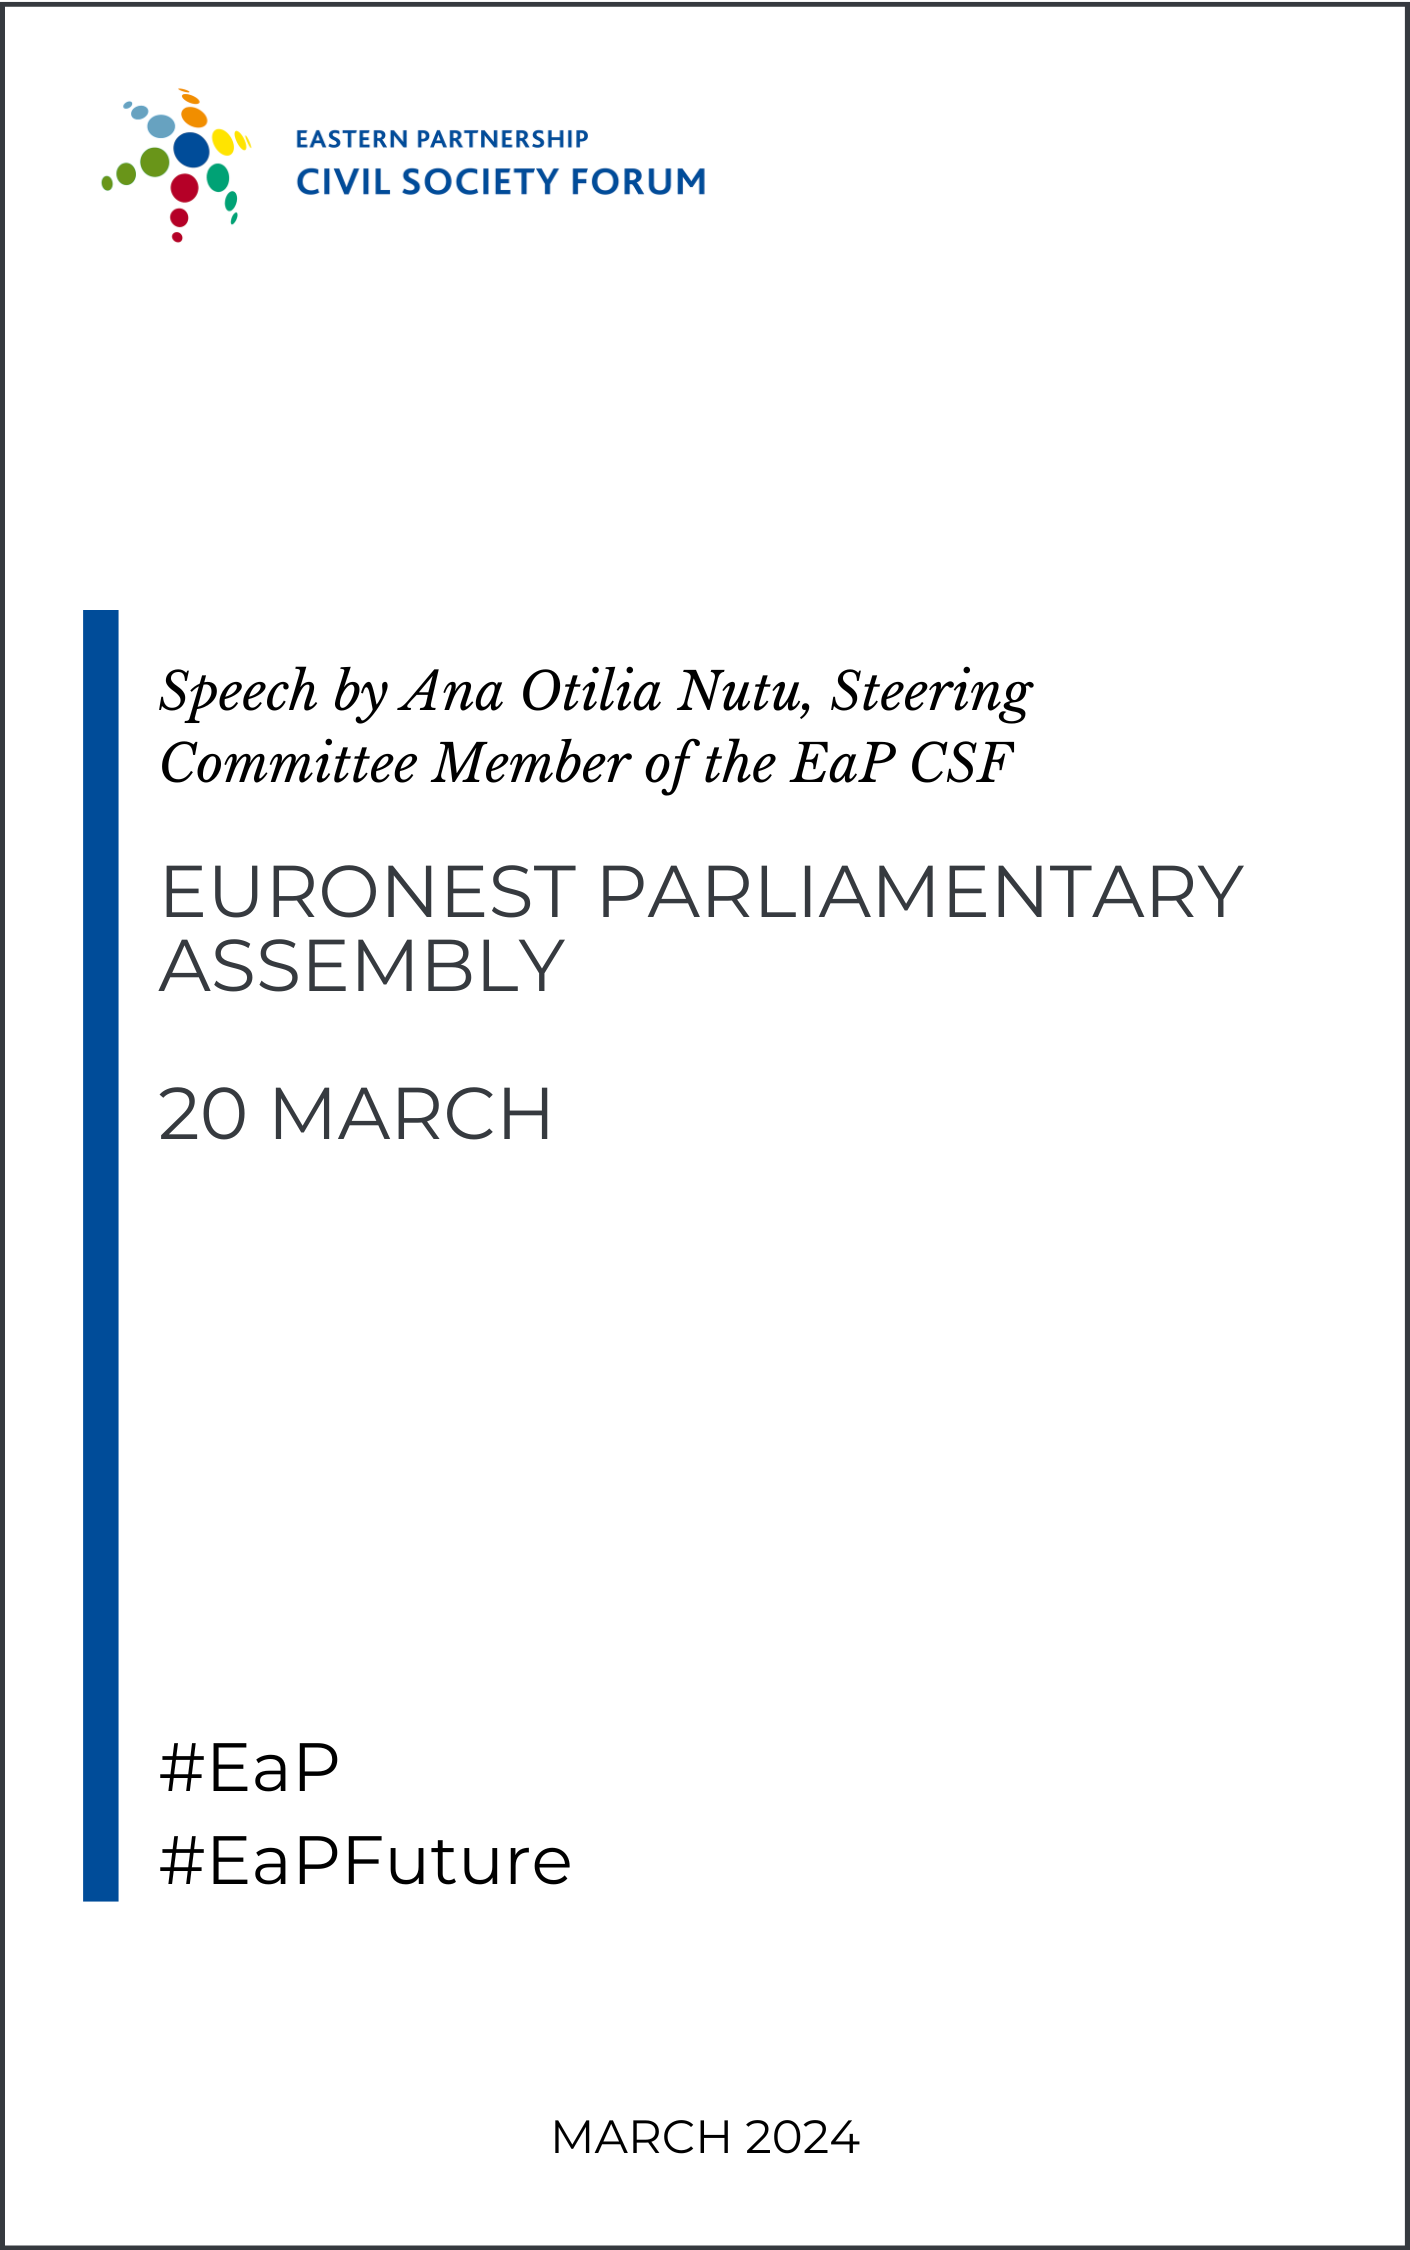 EuroNest Parliamentary Assembly Remarks by Ana Otilia